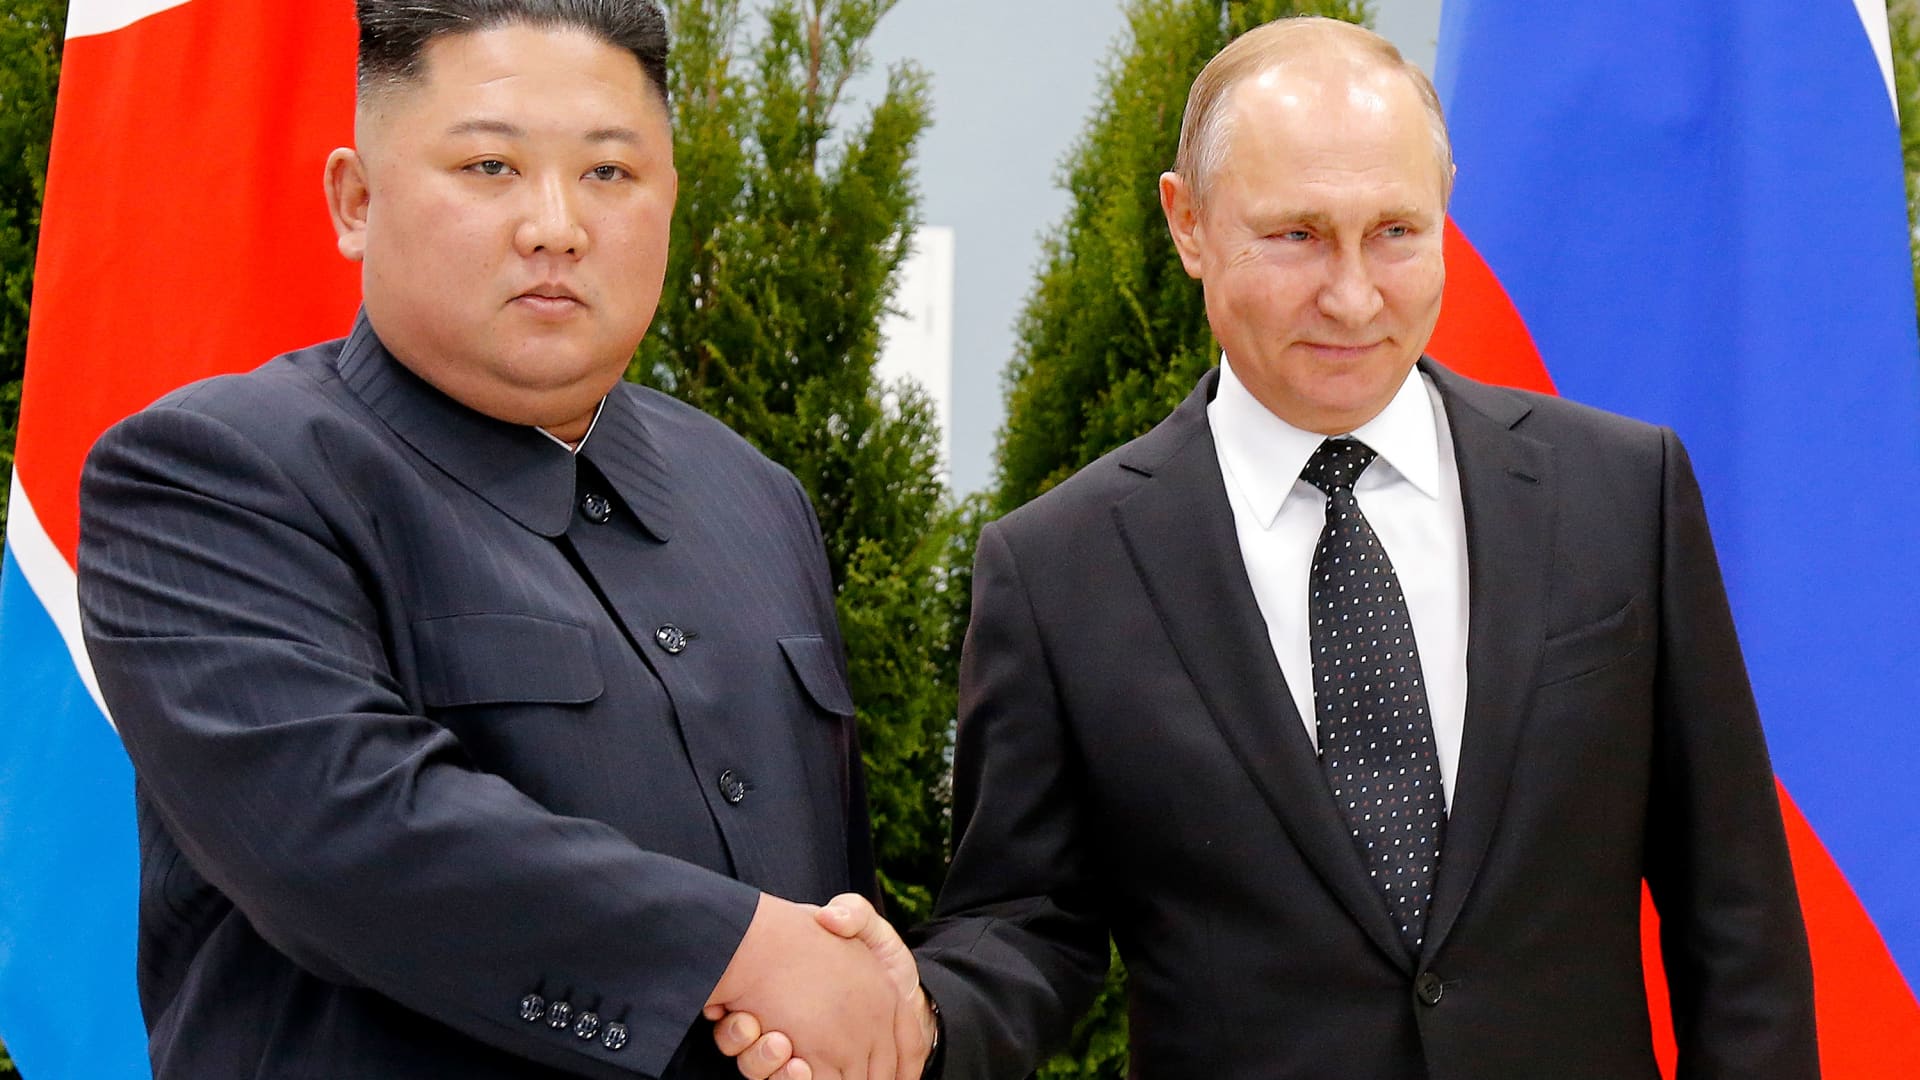 With Putin and Kim Jong Un set to meet, the West fears what Russia and North Korea are planning